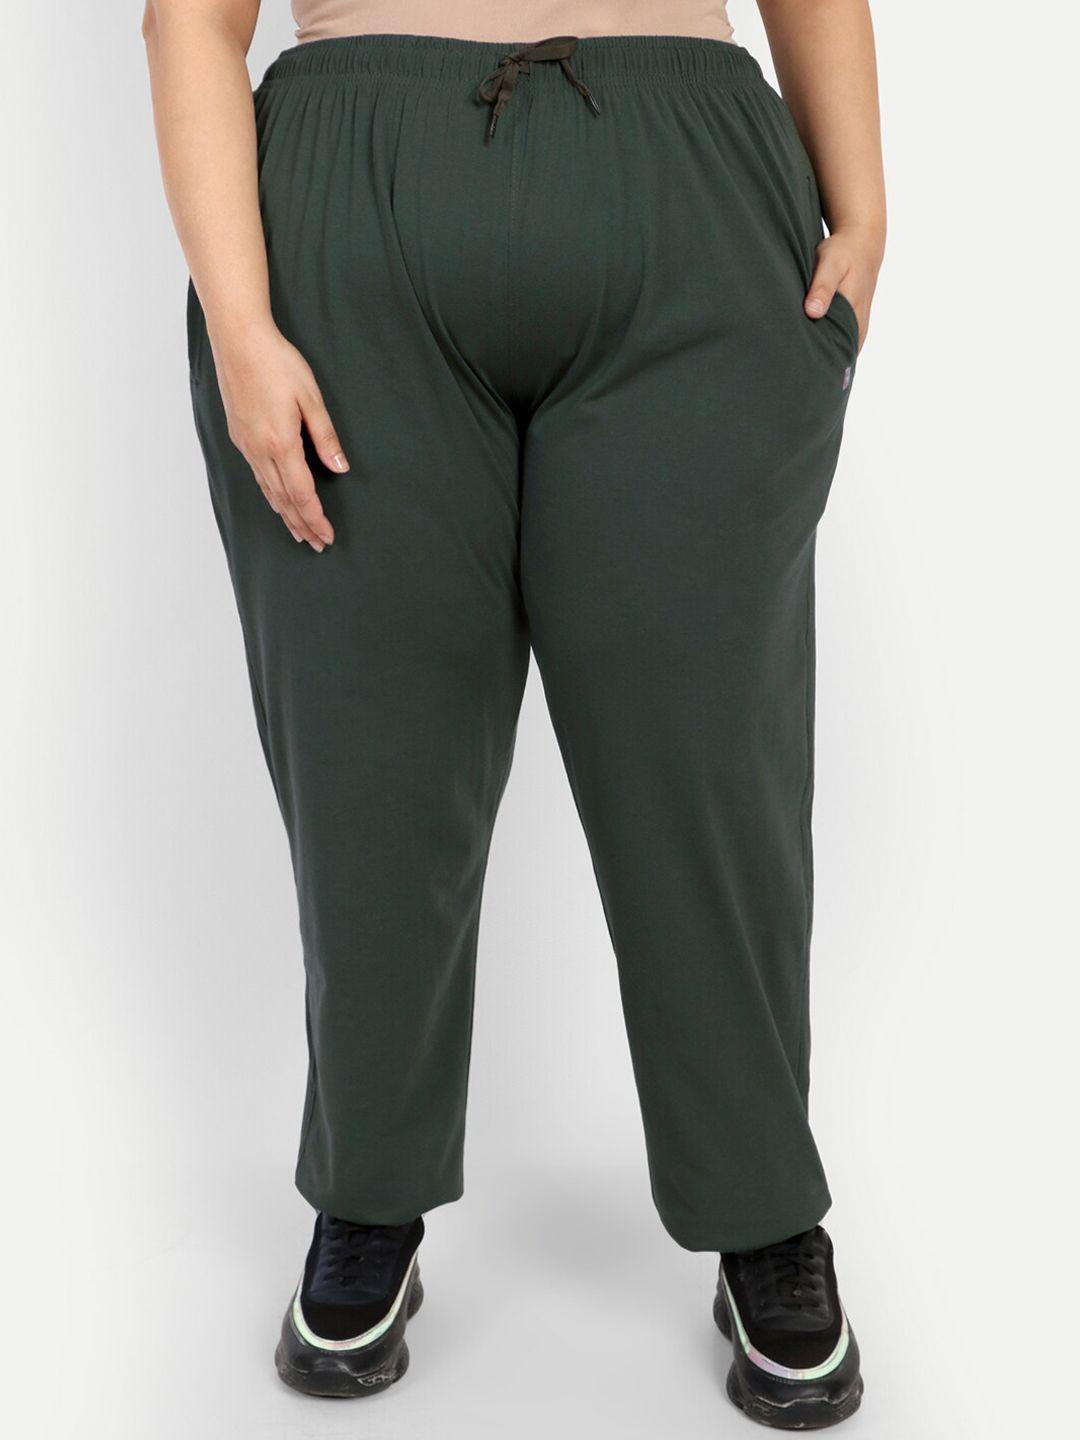 cupid-women-plus-size-olive-green-solid-cotton-lounge-pants